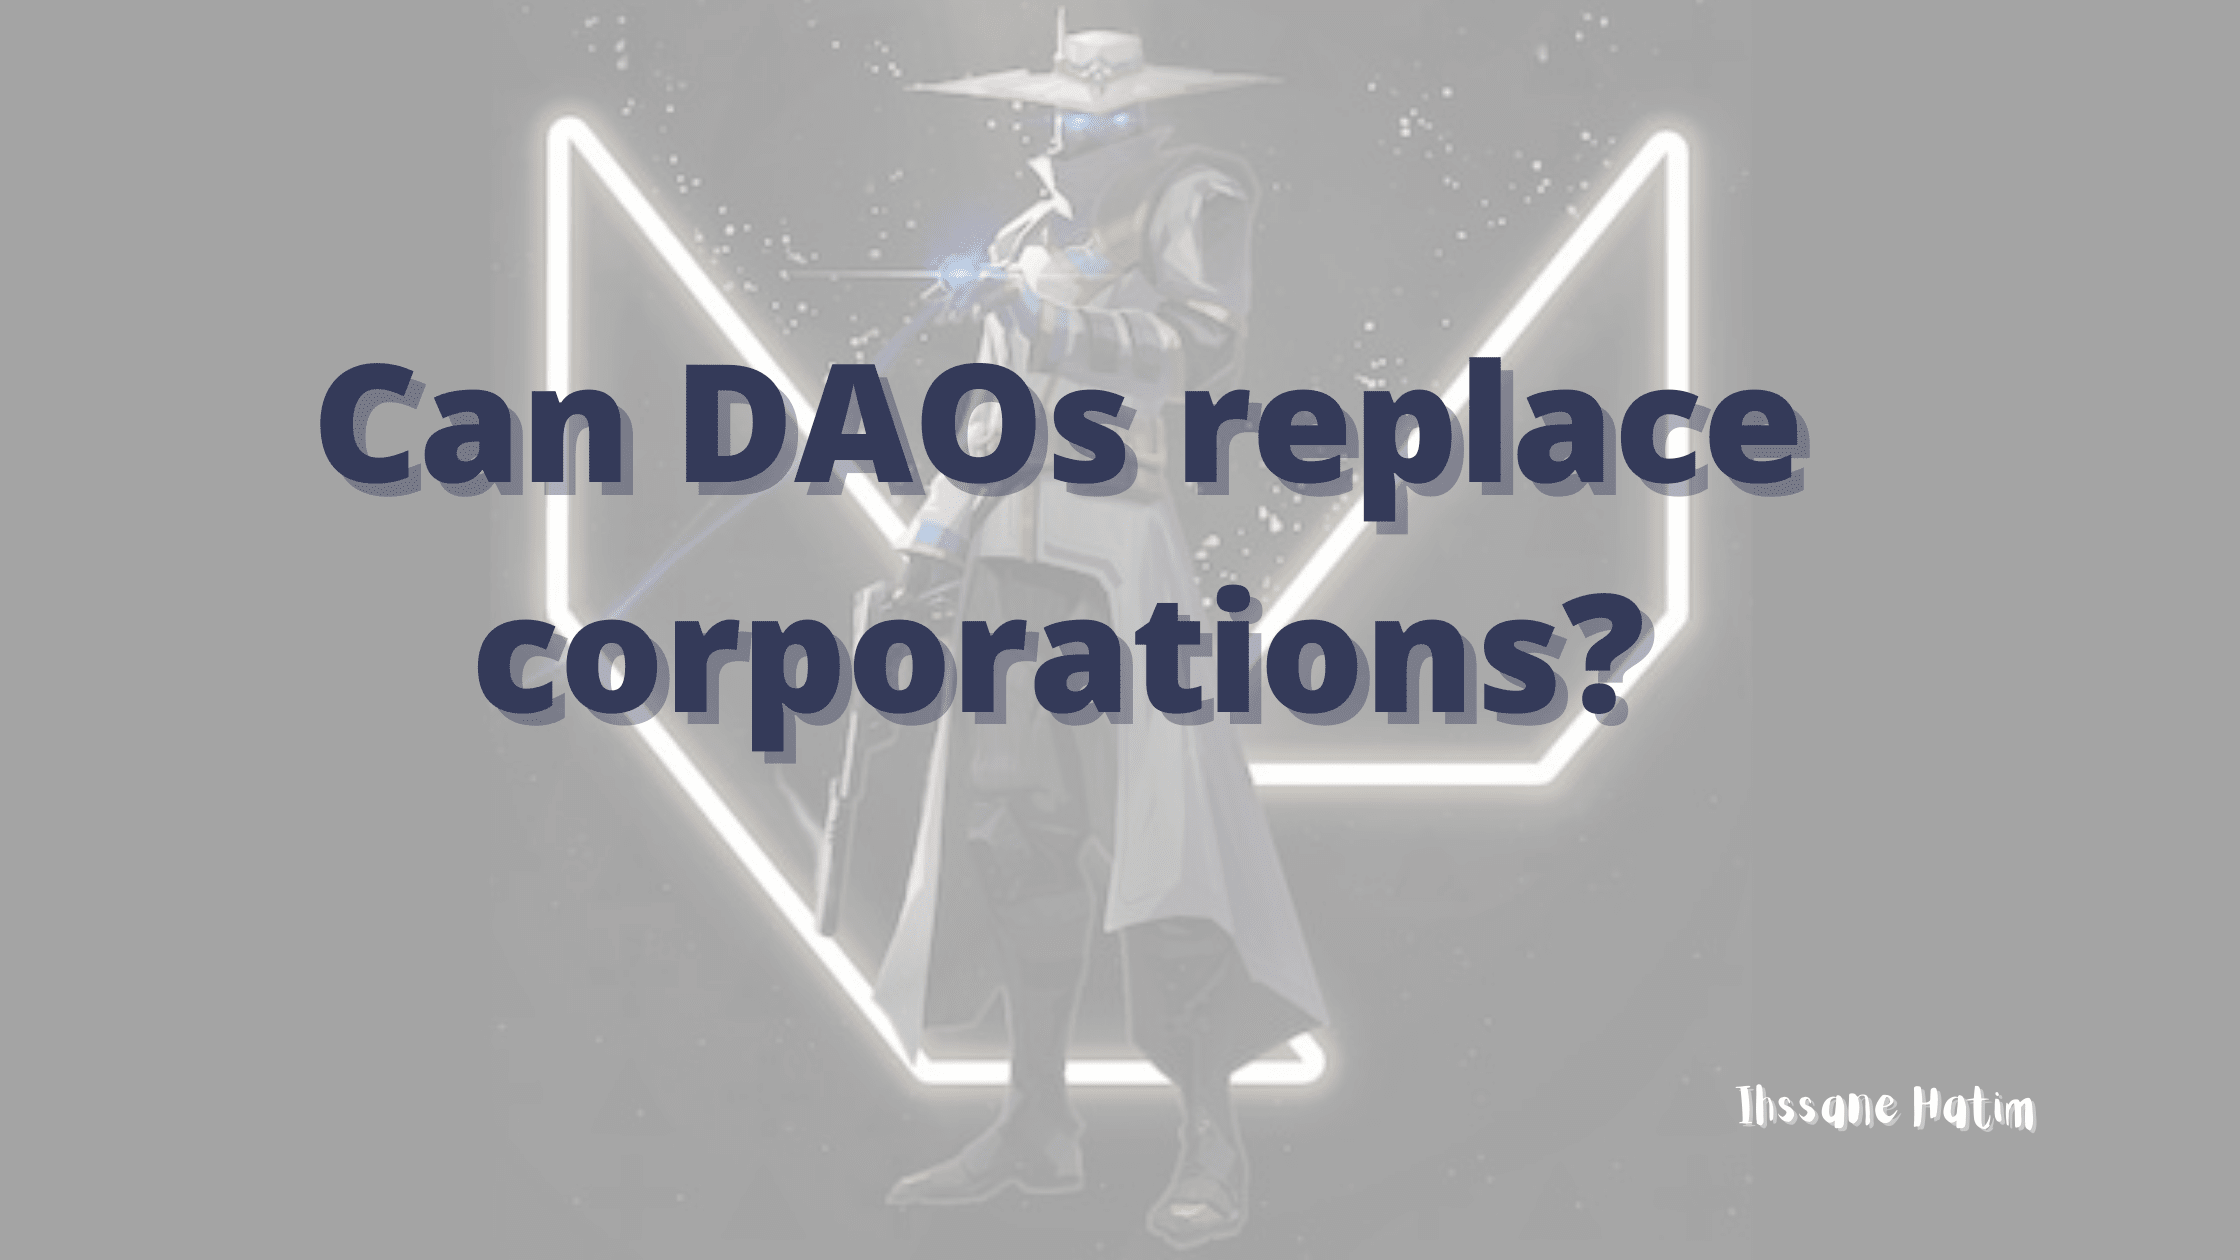 Can DAOs replace corporations?